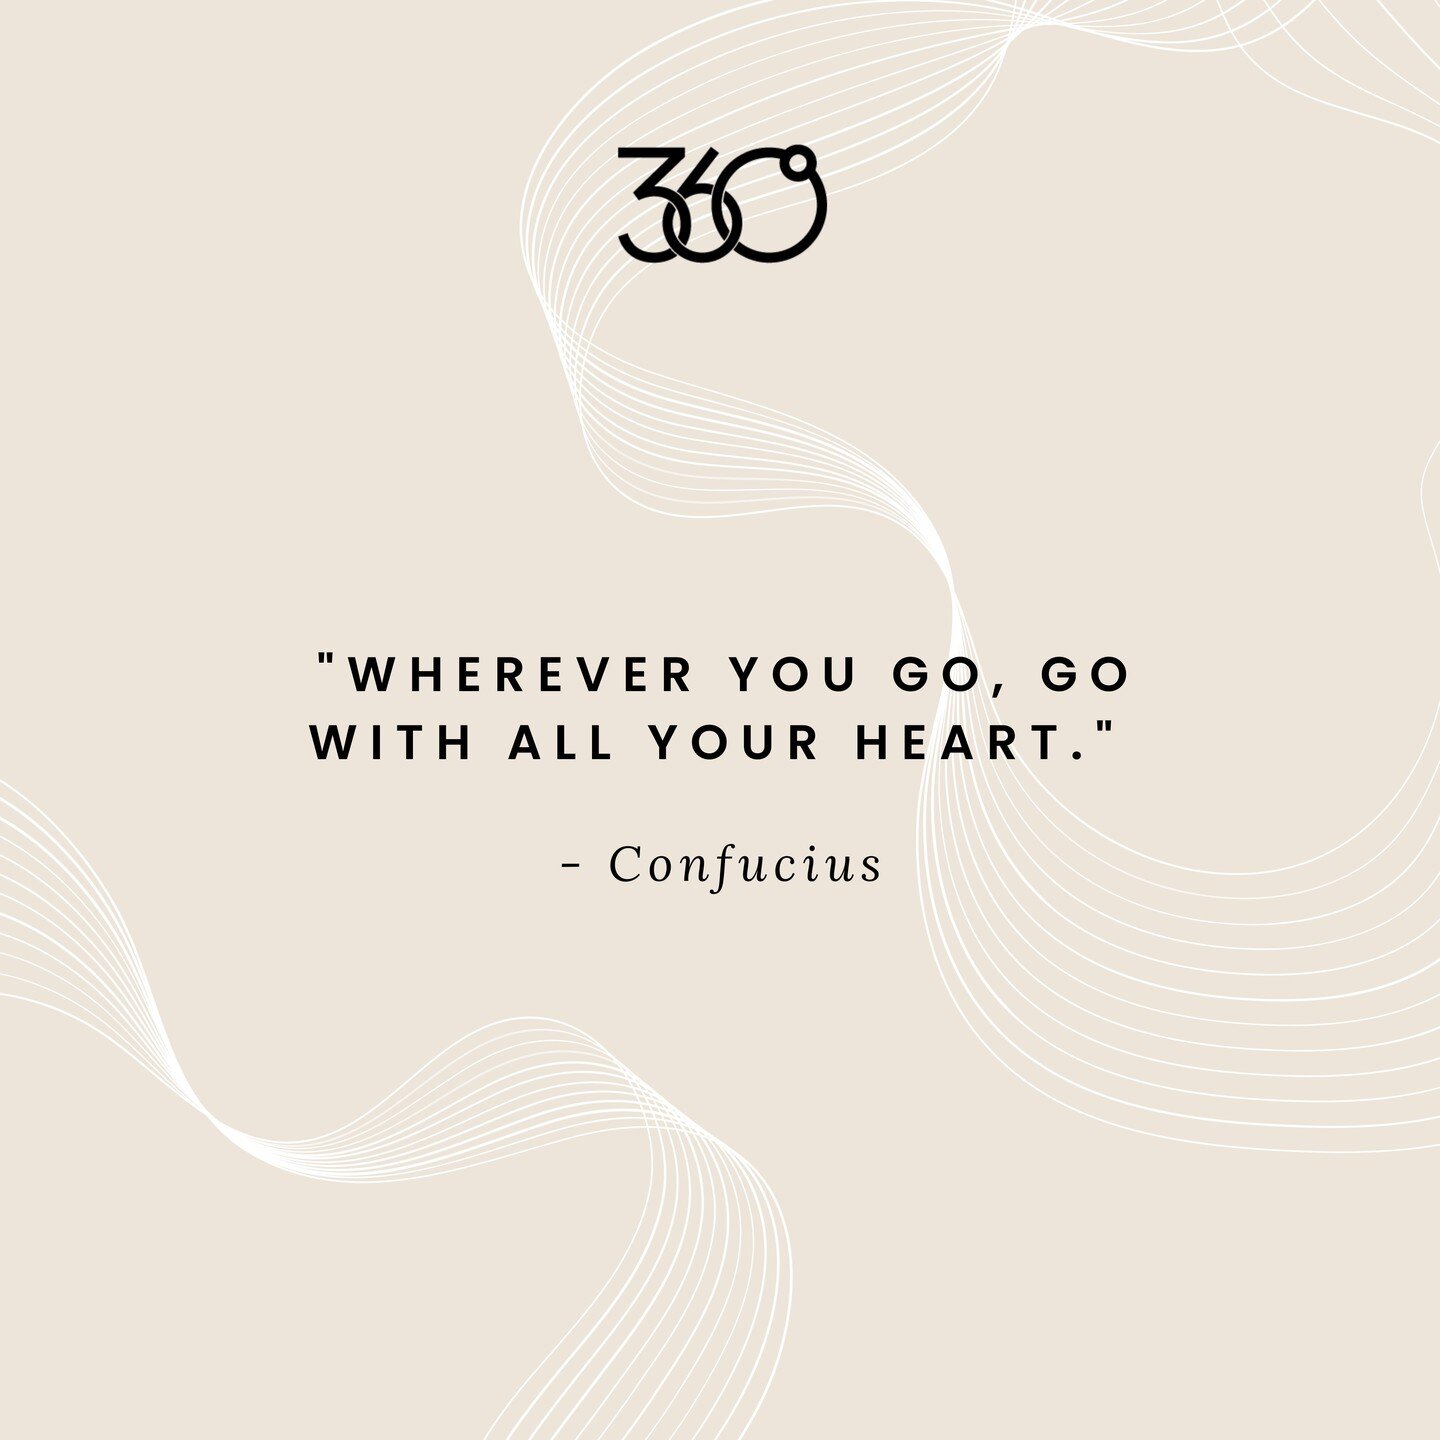 A lovely reminder from Confucius, wherever your journey may take you in life, go with all of your heart. From our Concept 360 team to you, we hope that includes many walks in nature, exploration of the most beautiful parts of earth, and the desire to